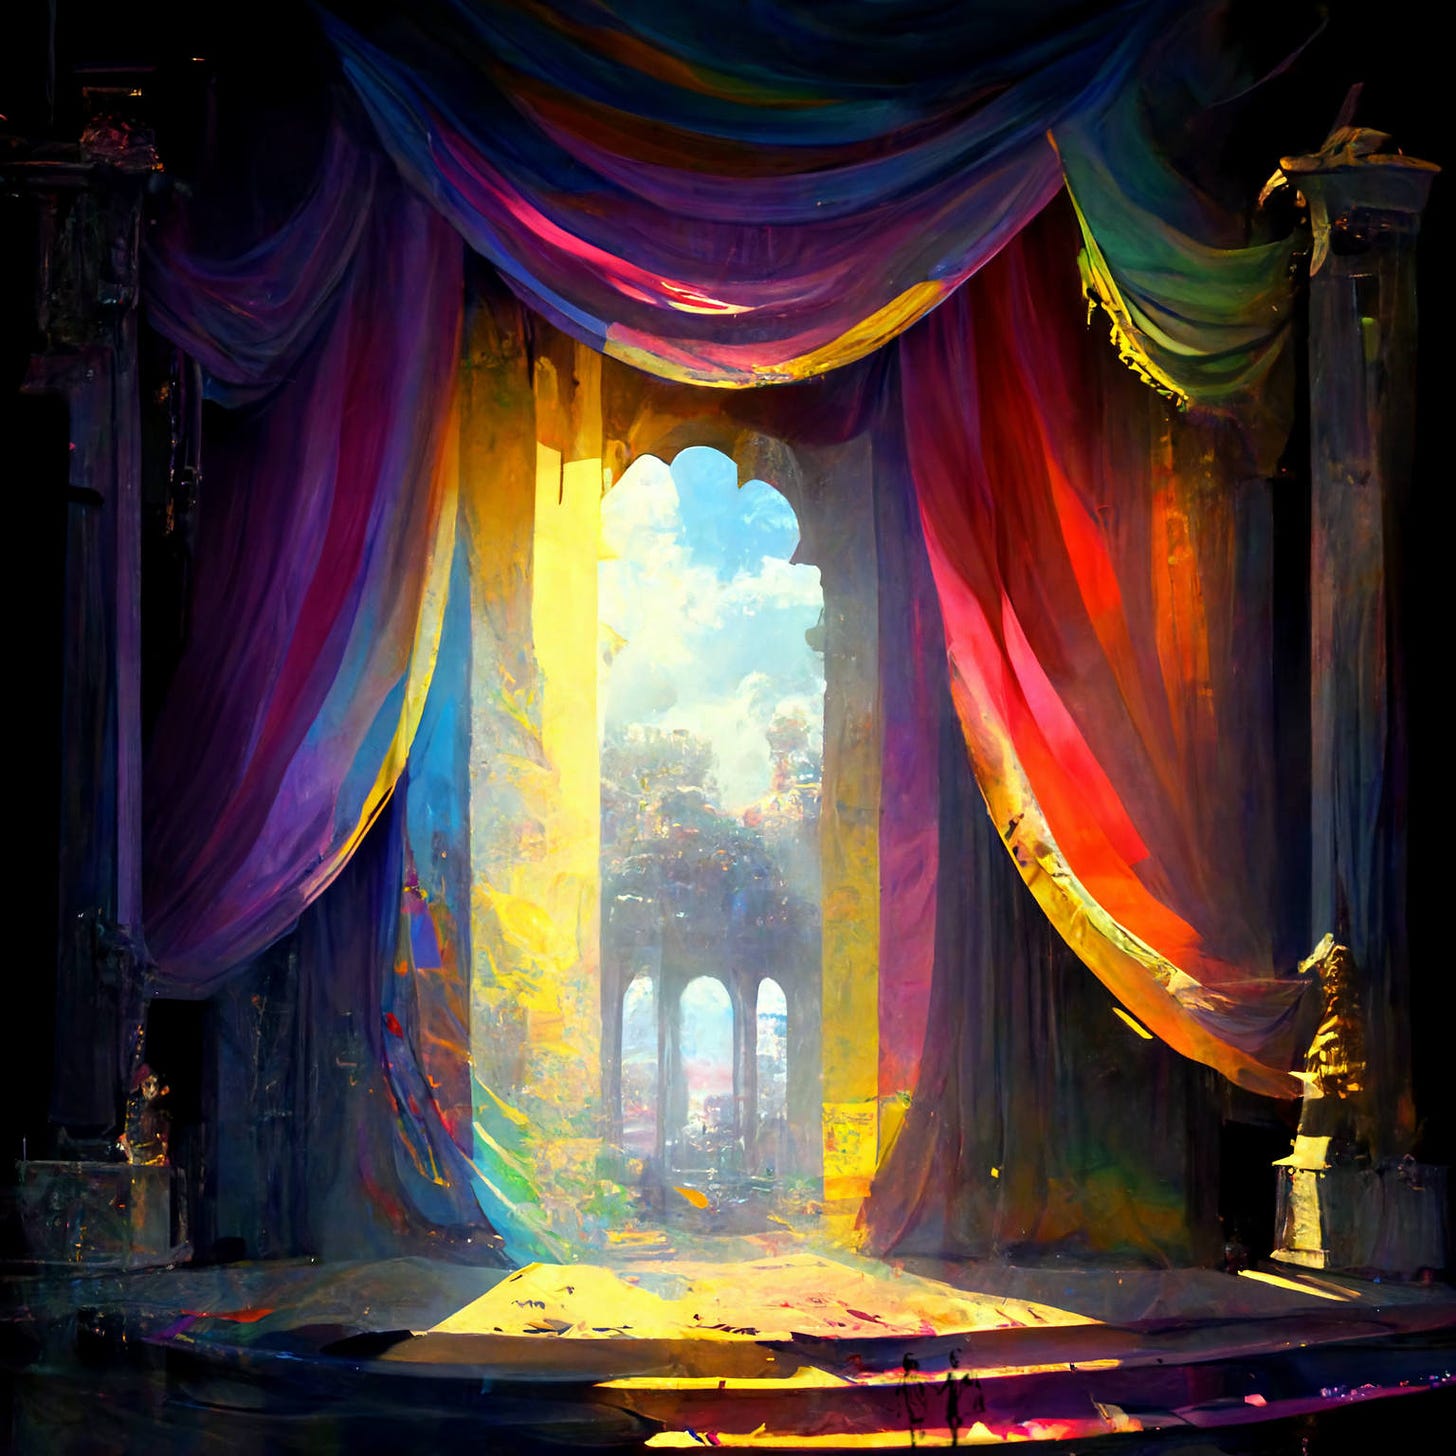 An artistic rendering of a stage with the curtains partially open. The back of the stage opens to the outside, where a coliseum type structure can be seen in the distance.